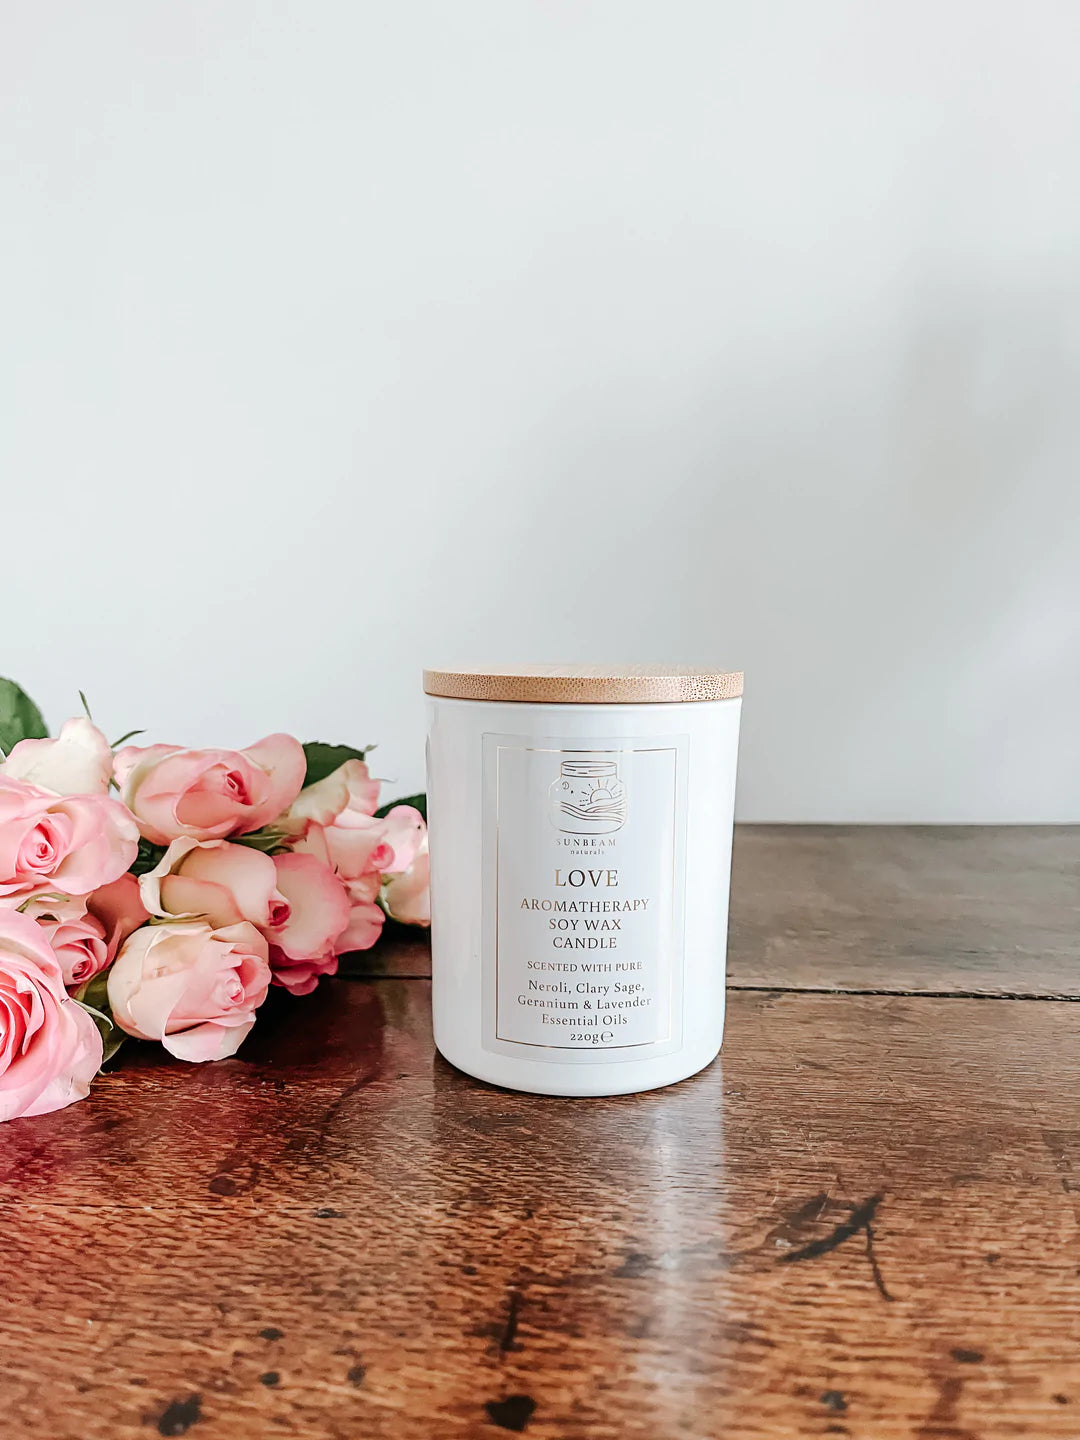 Sunbream Natural Deluxe Aromatherapy Candle | Love Scent